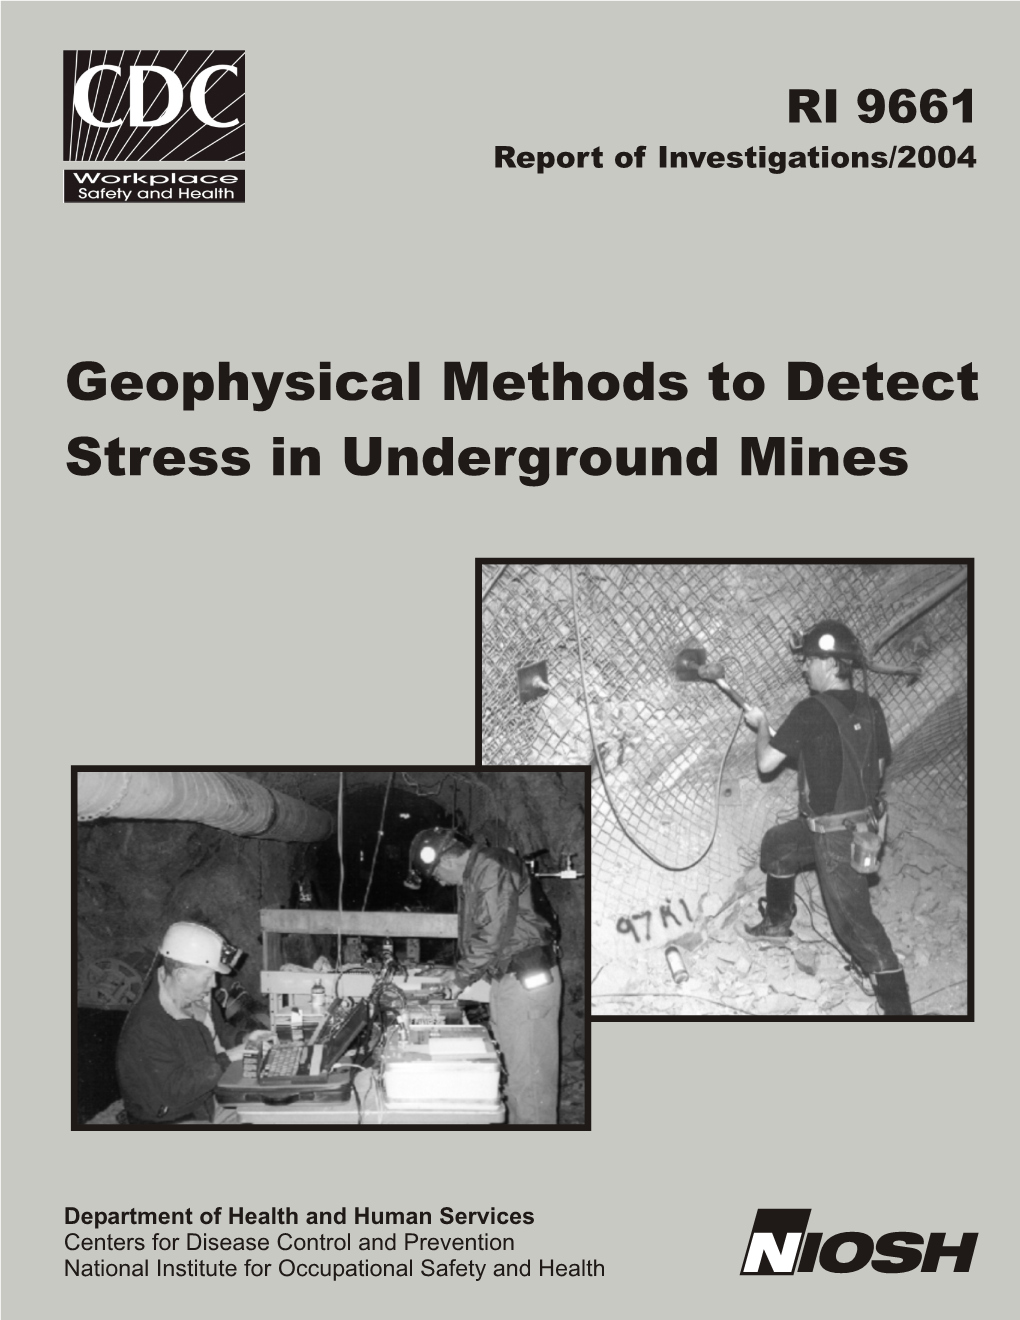 Geophysical Methods to Detect Stress in Underground Mines